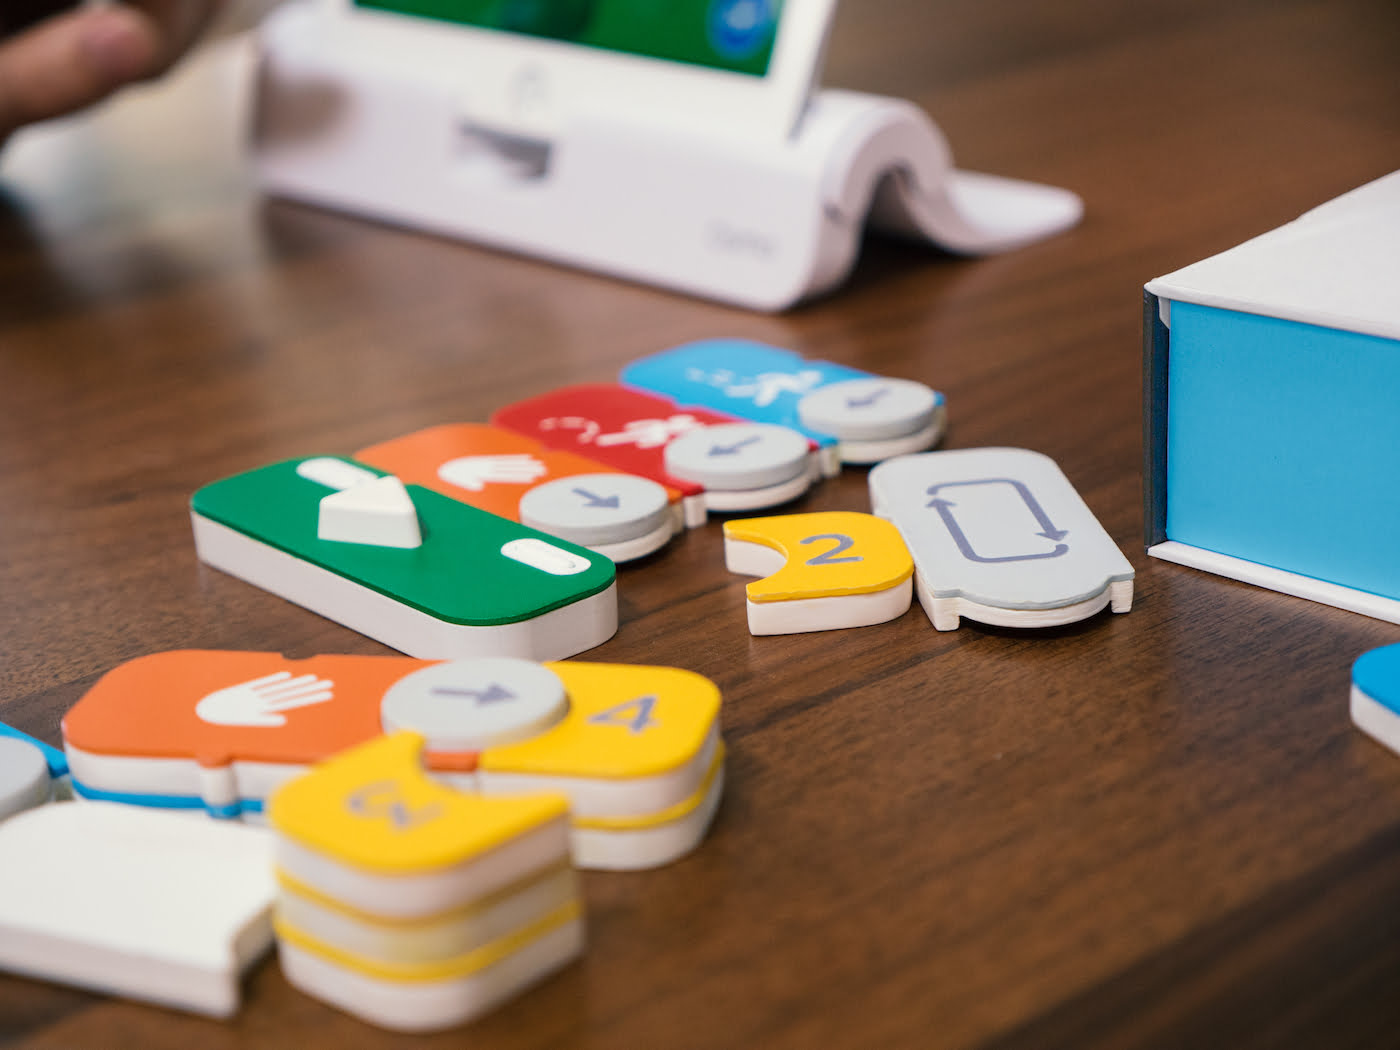 Osmo’s blocks are like Lego for coding